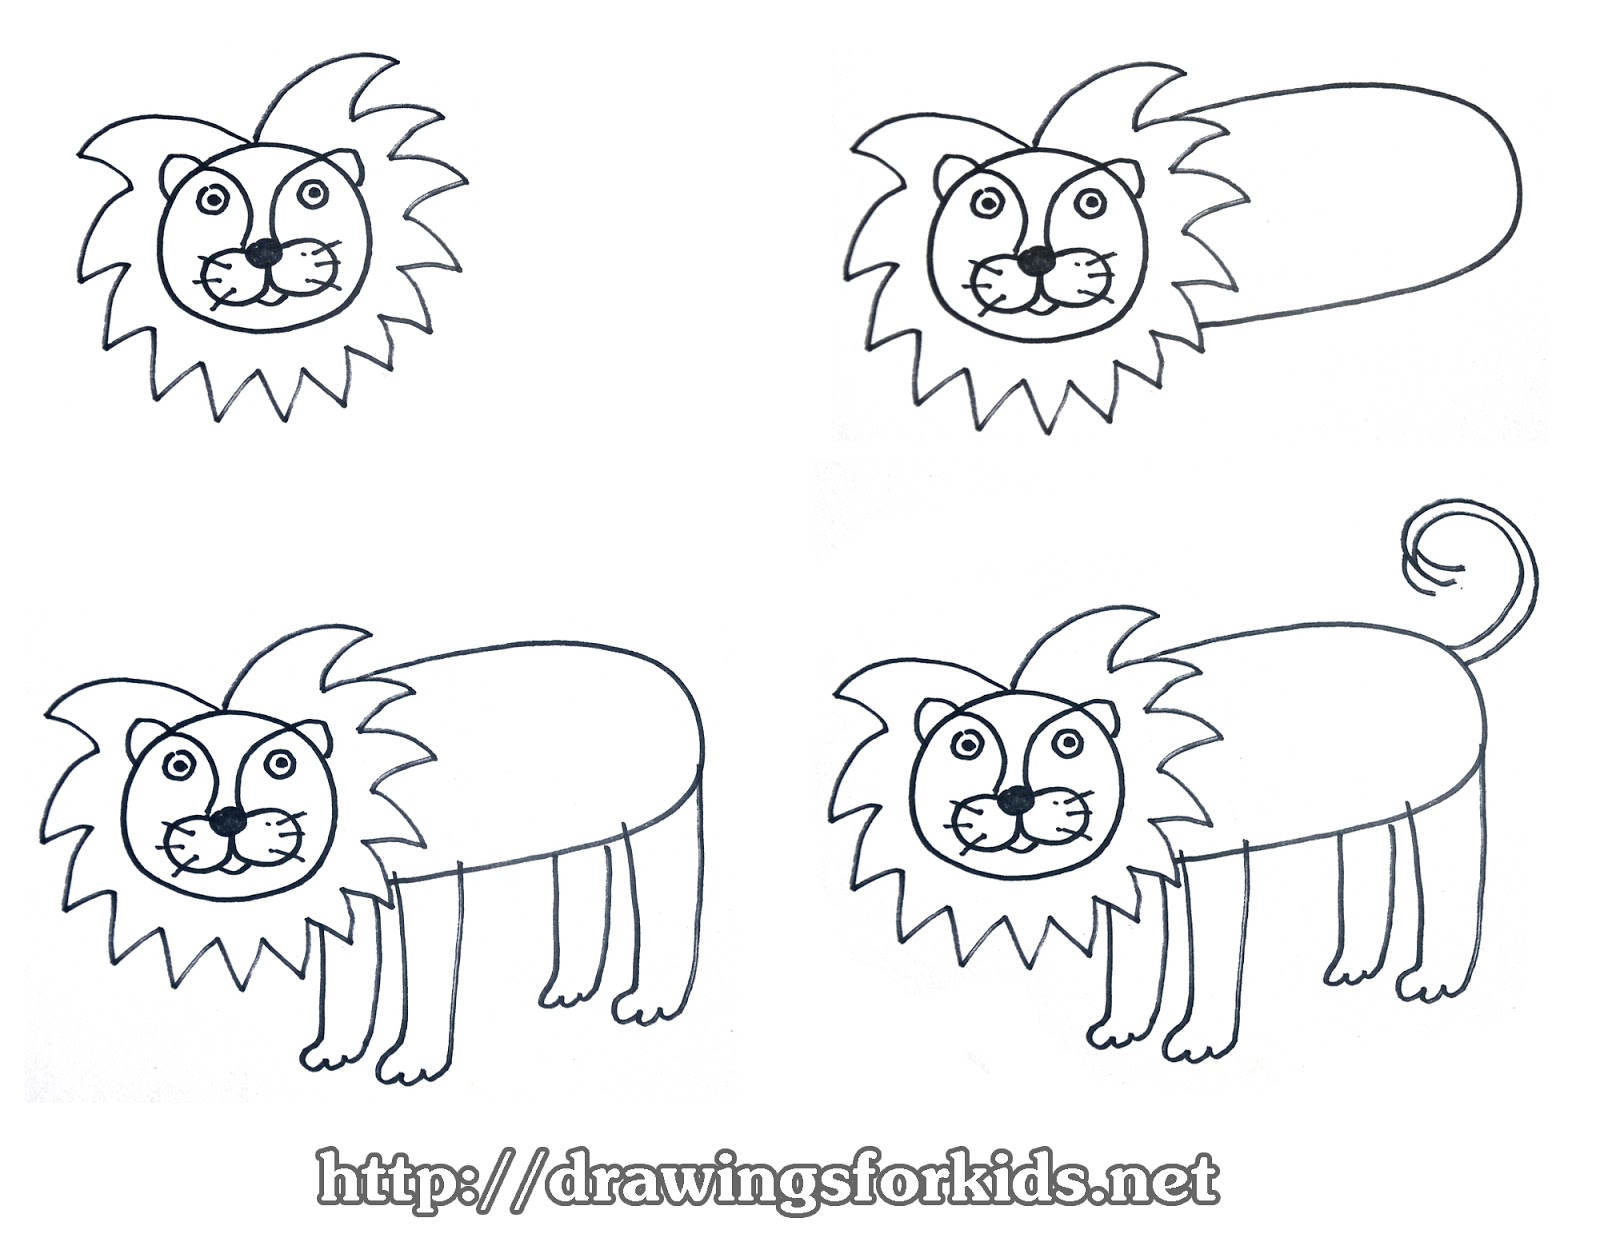 How to draw a lion for kids - drawingsforkids.net